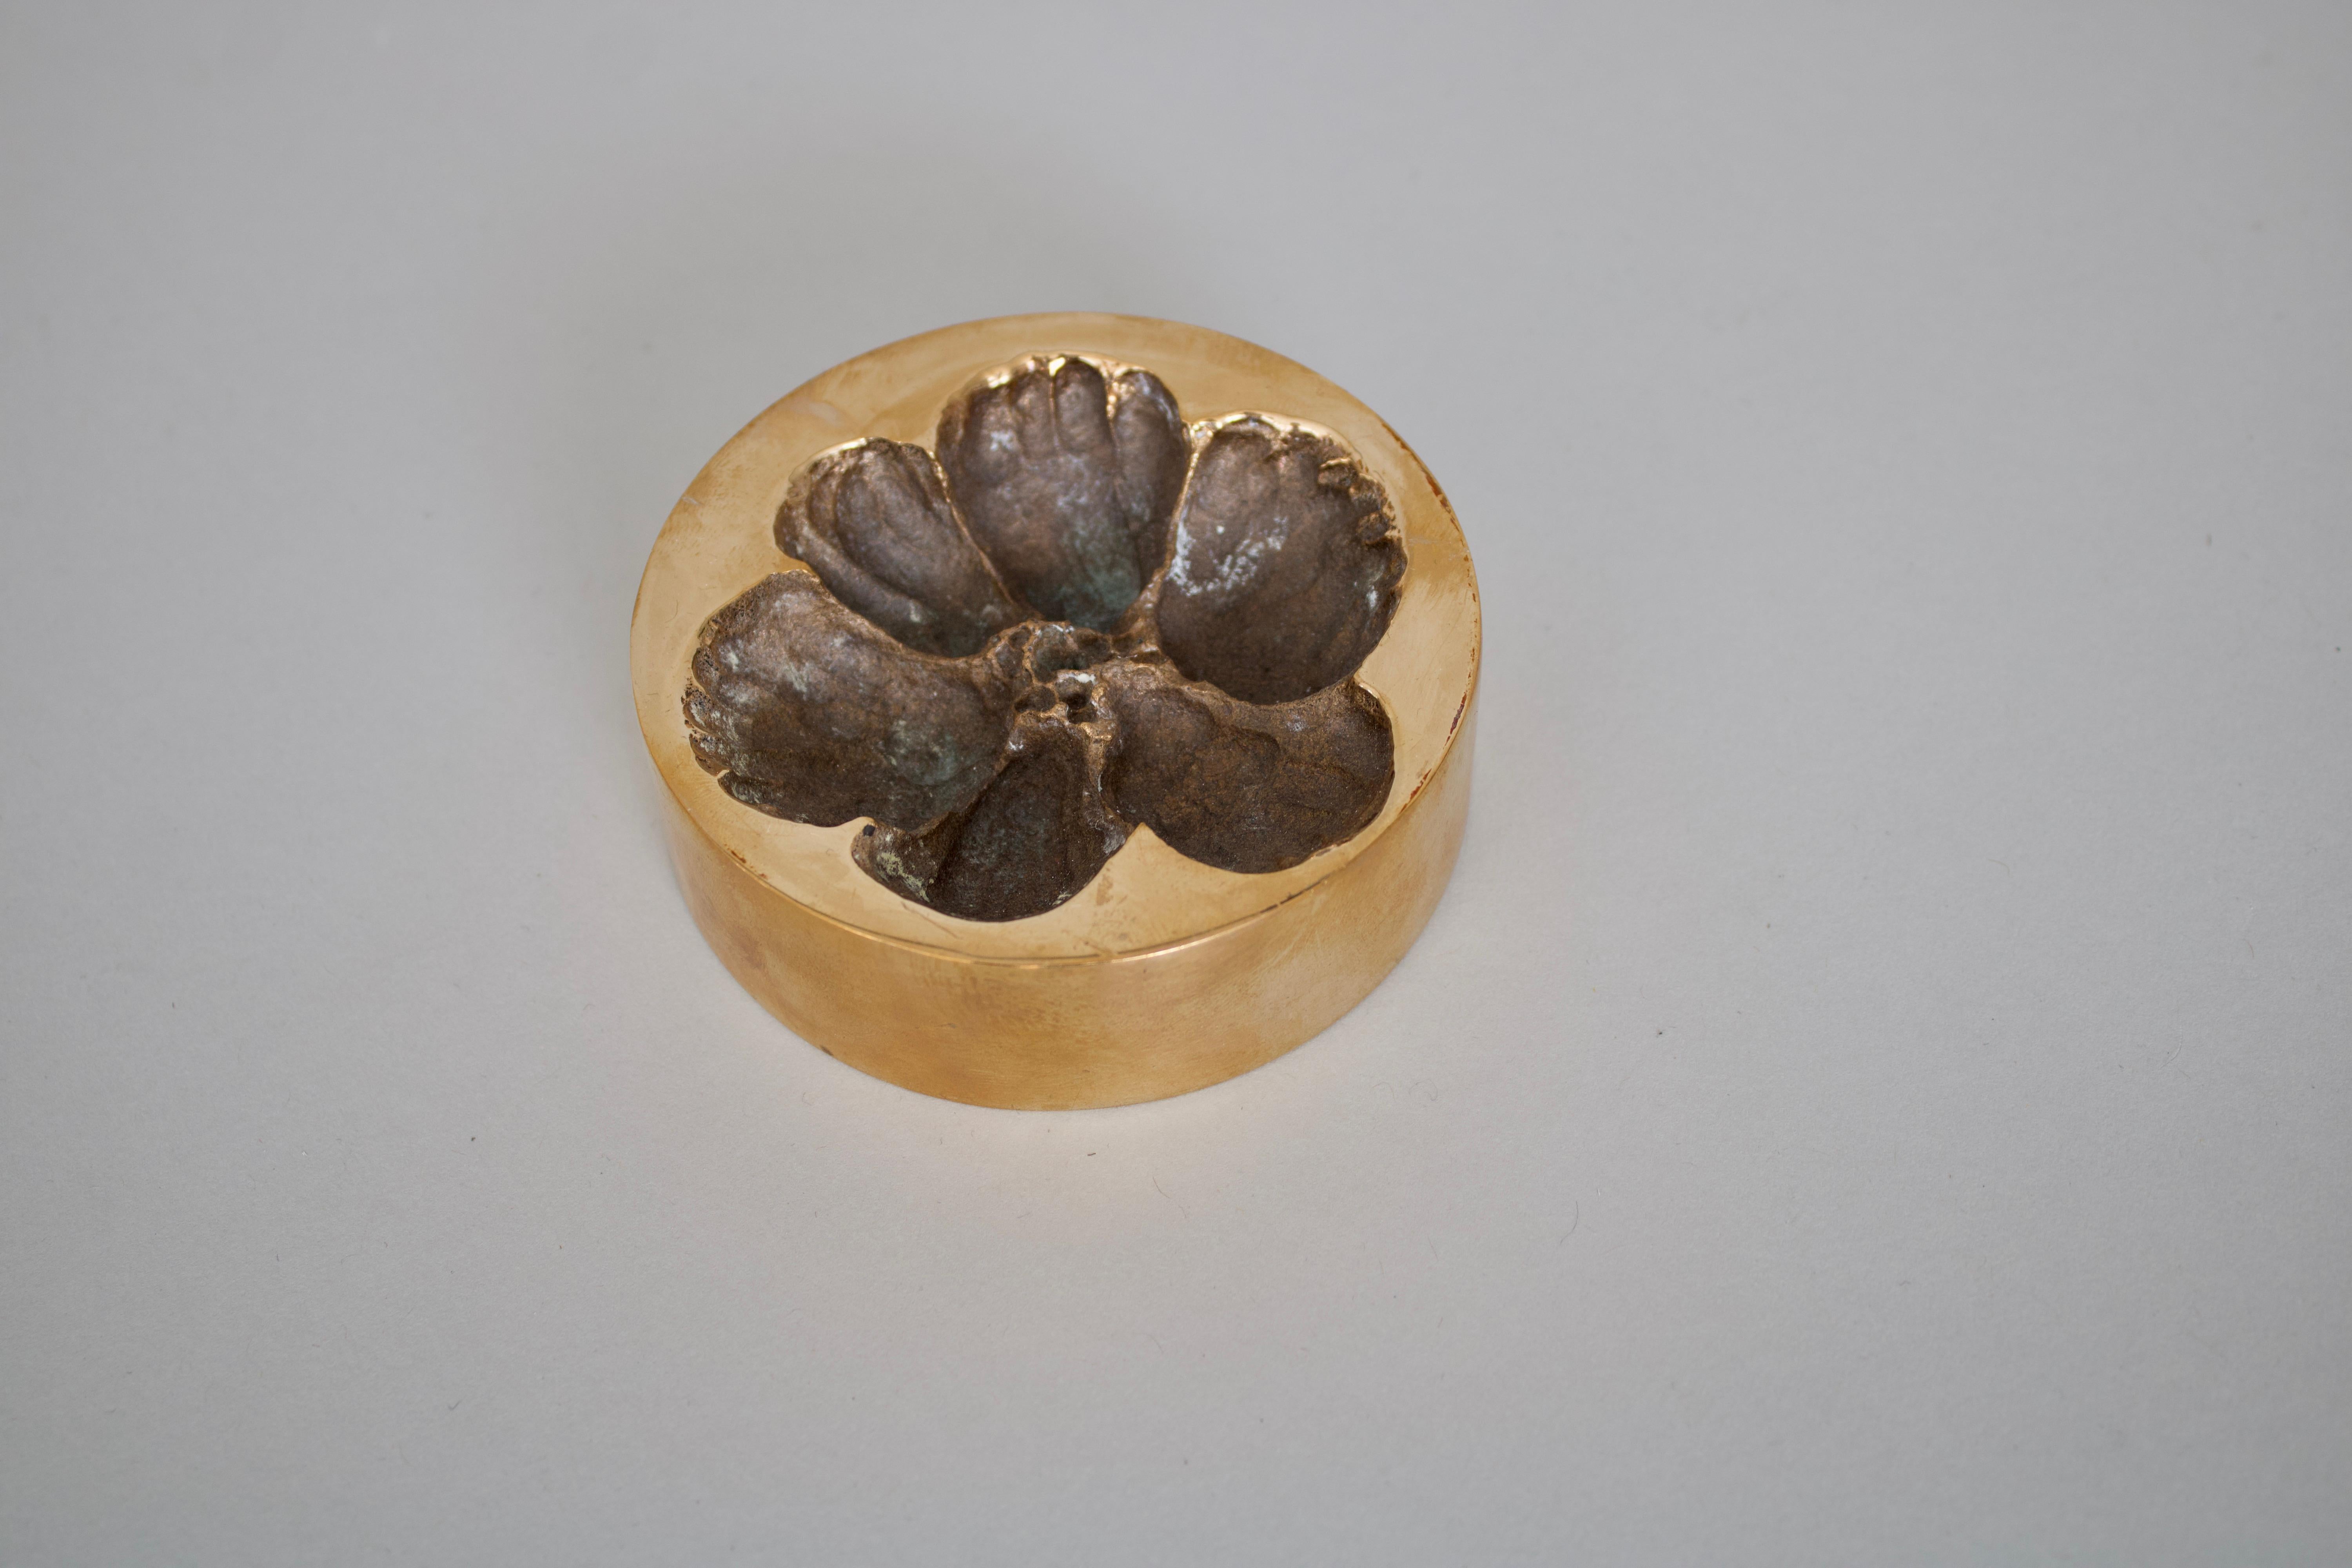 A bronze vide poche or decorative dish by French artist Monique Gerber in the motif of a large petal Marguerite or daisy. Classic Monique Gerber c 1970
Signed MG.

